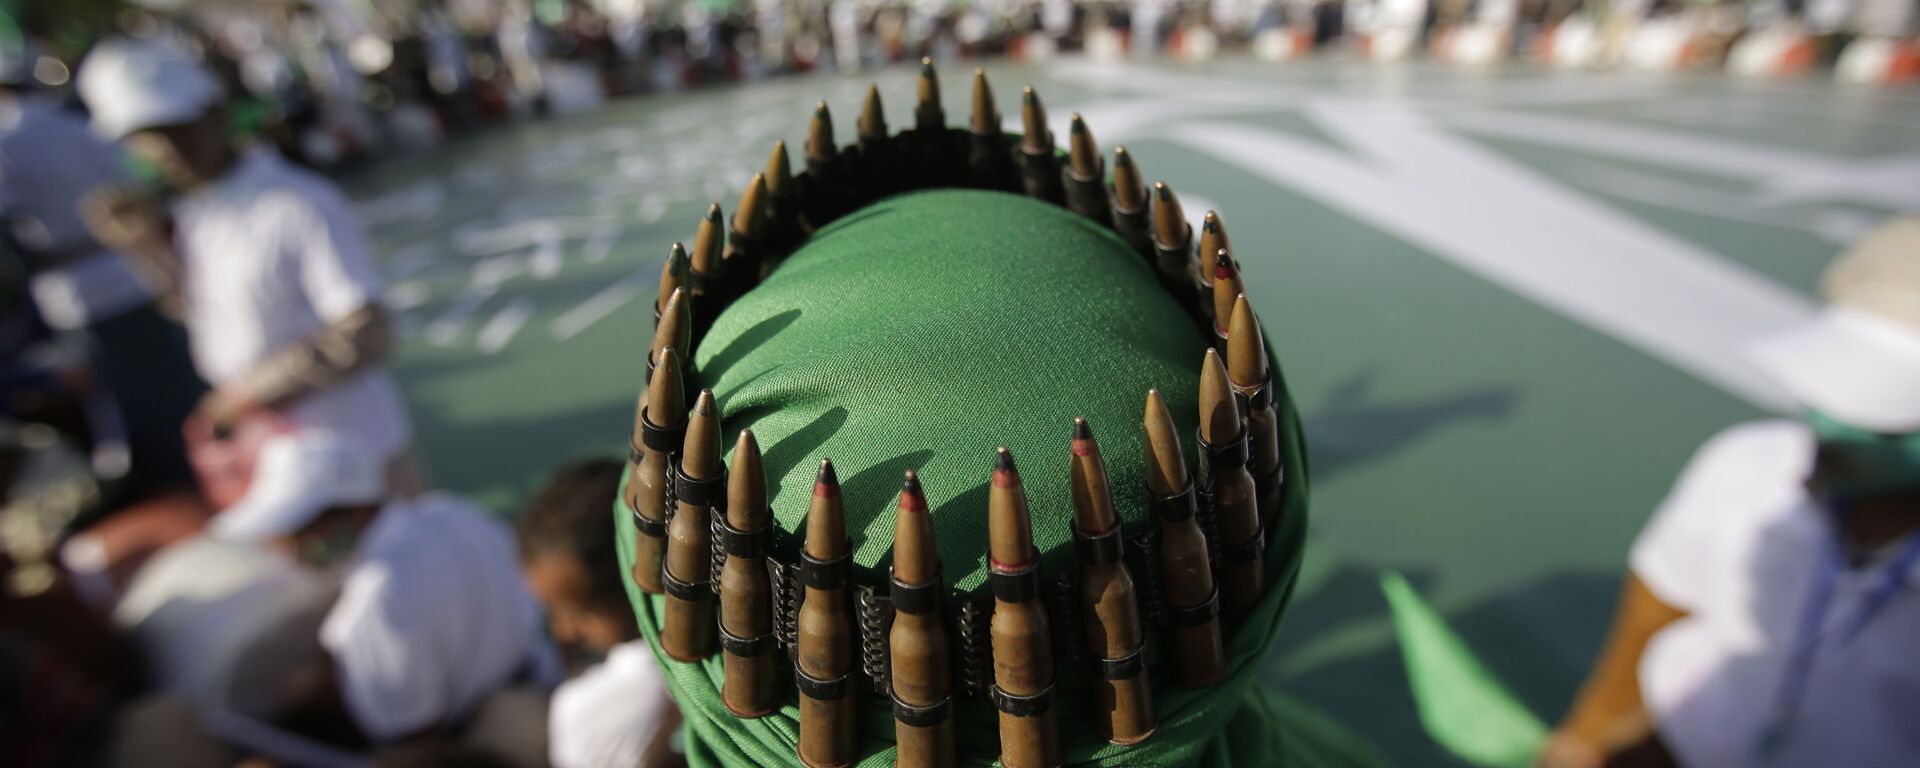 A supporter of Shiite rebels, known as Houthis, with an ammunition belt placed on his head attends a celebration of Moulid al-nabi, the birth of Islam's prophet Muhammad in Sanaa, Yemen, Saturday, Nov. 9, 2019 - Sputnik International, 1920, 03.05.2024